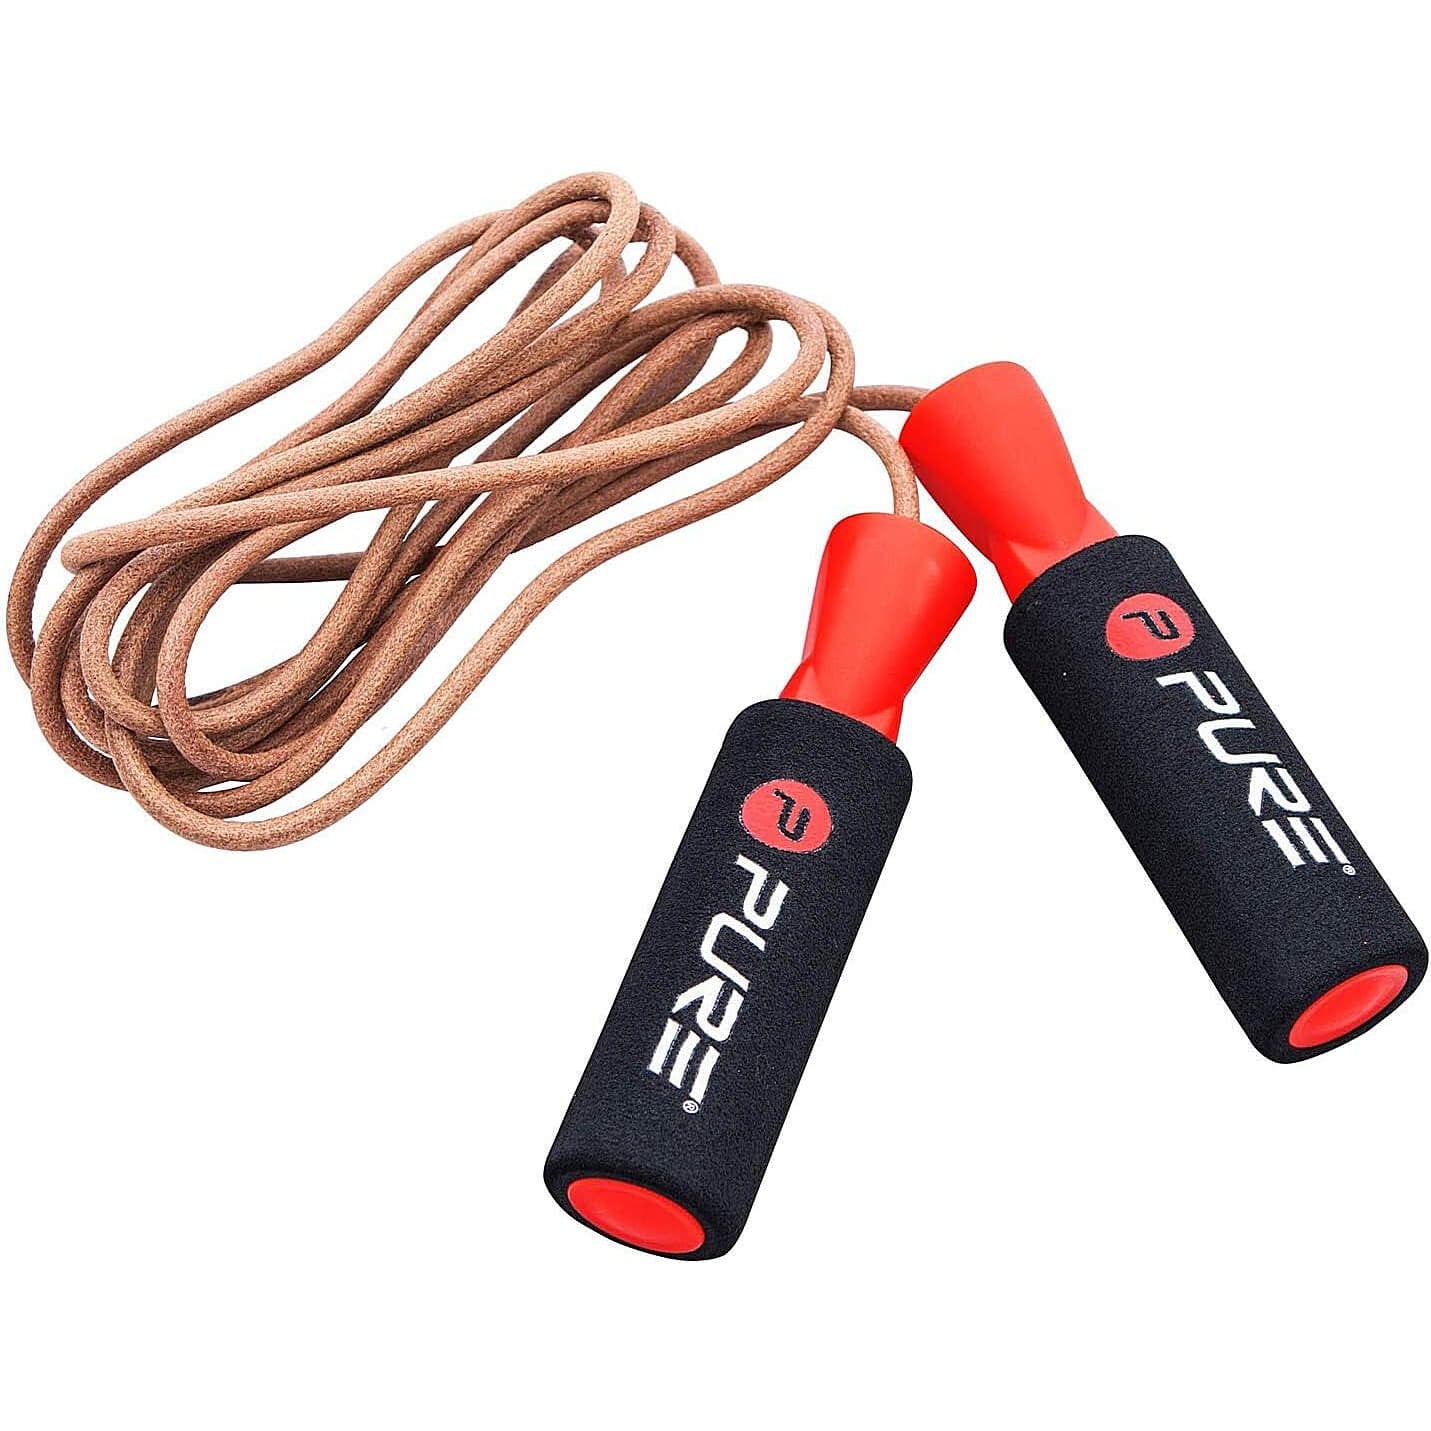 Pure2Improve Leather Jump Rope 275 CM